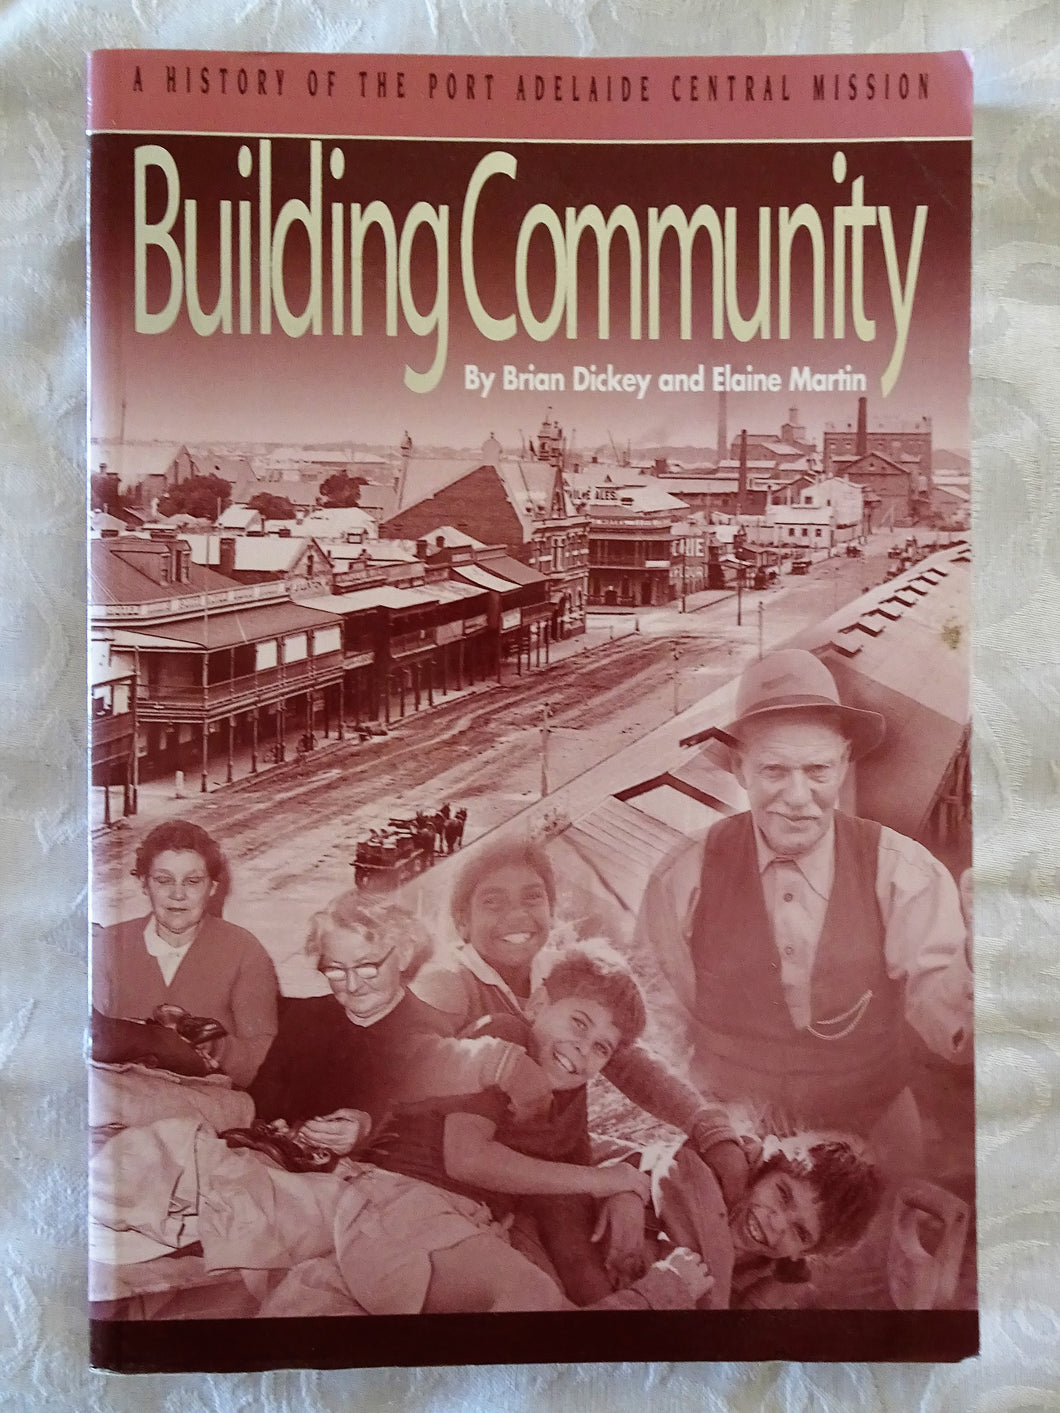 Building Community  A History of the Port Adelaide Central Mission  by Brian Dickey and Elaine Martin